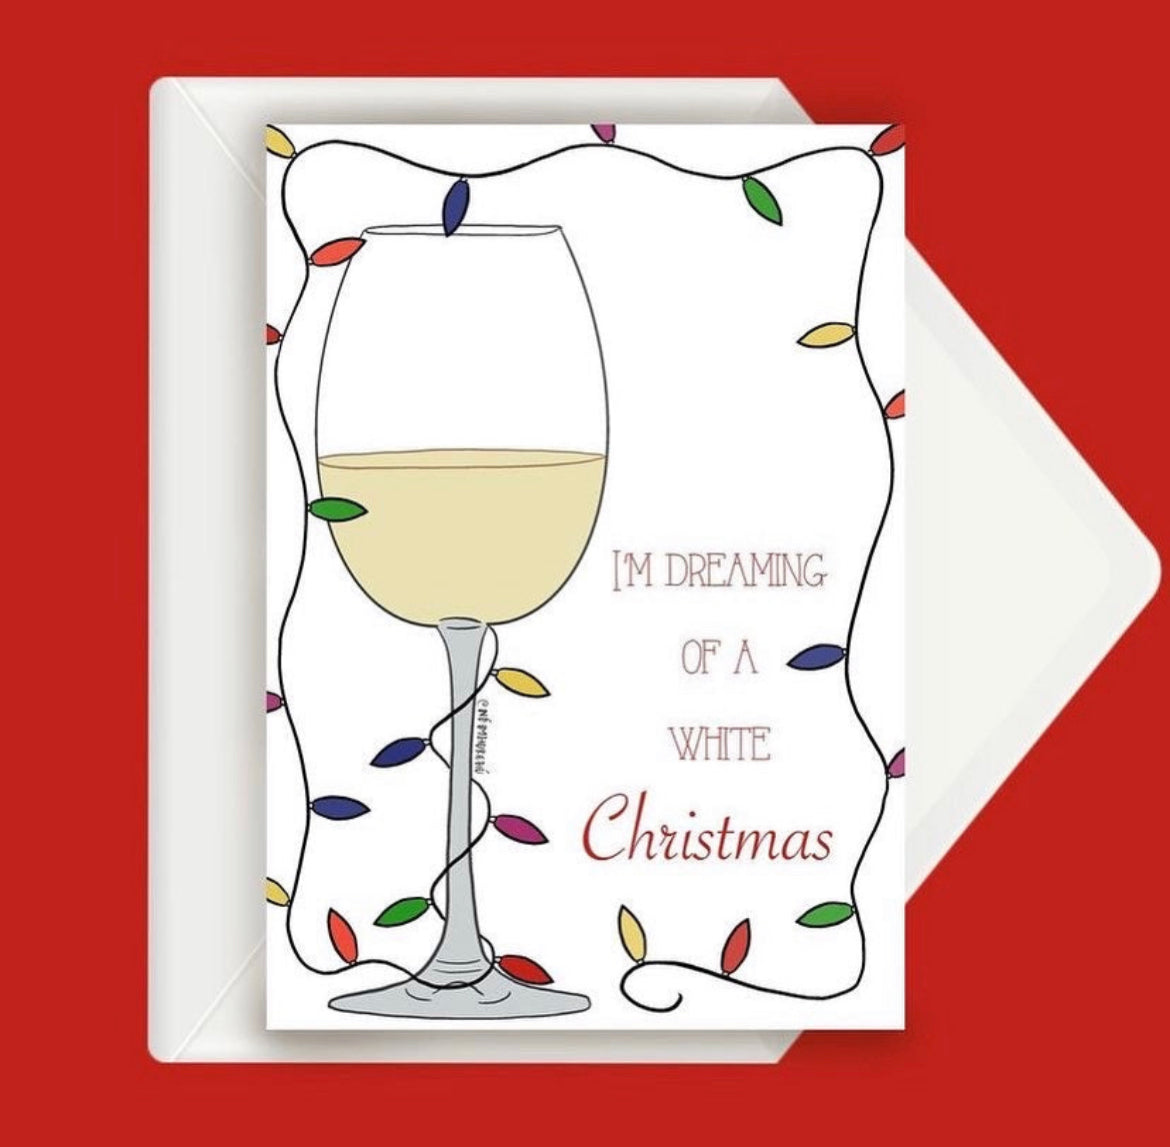 I’m dreaming of a white Christmas card Irish made funny